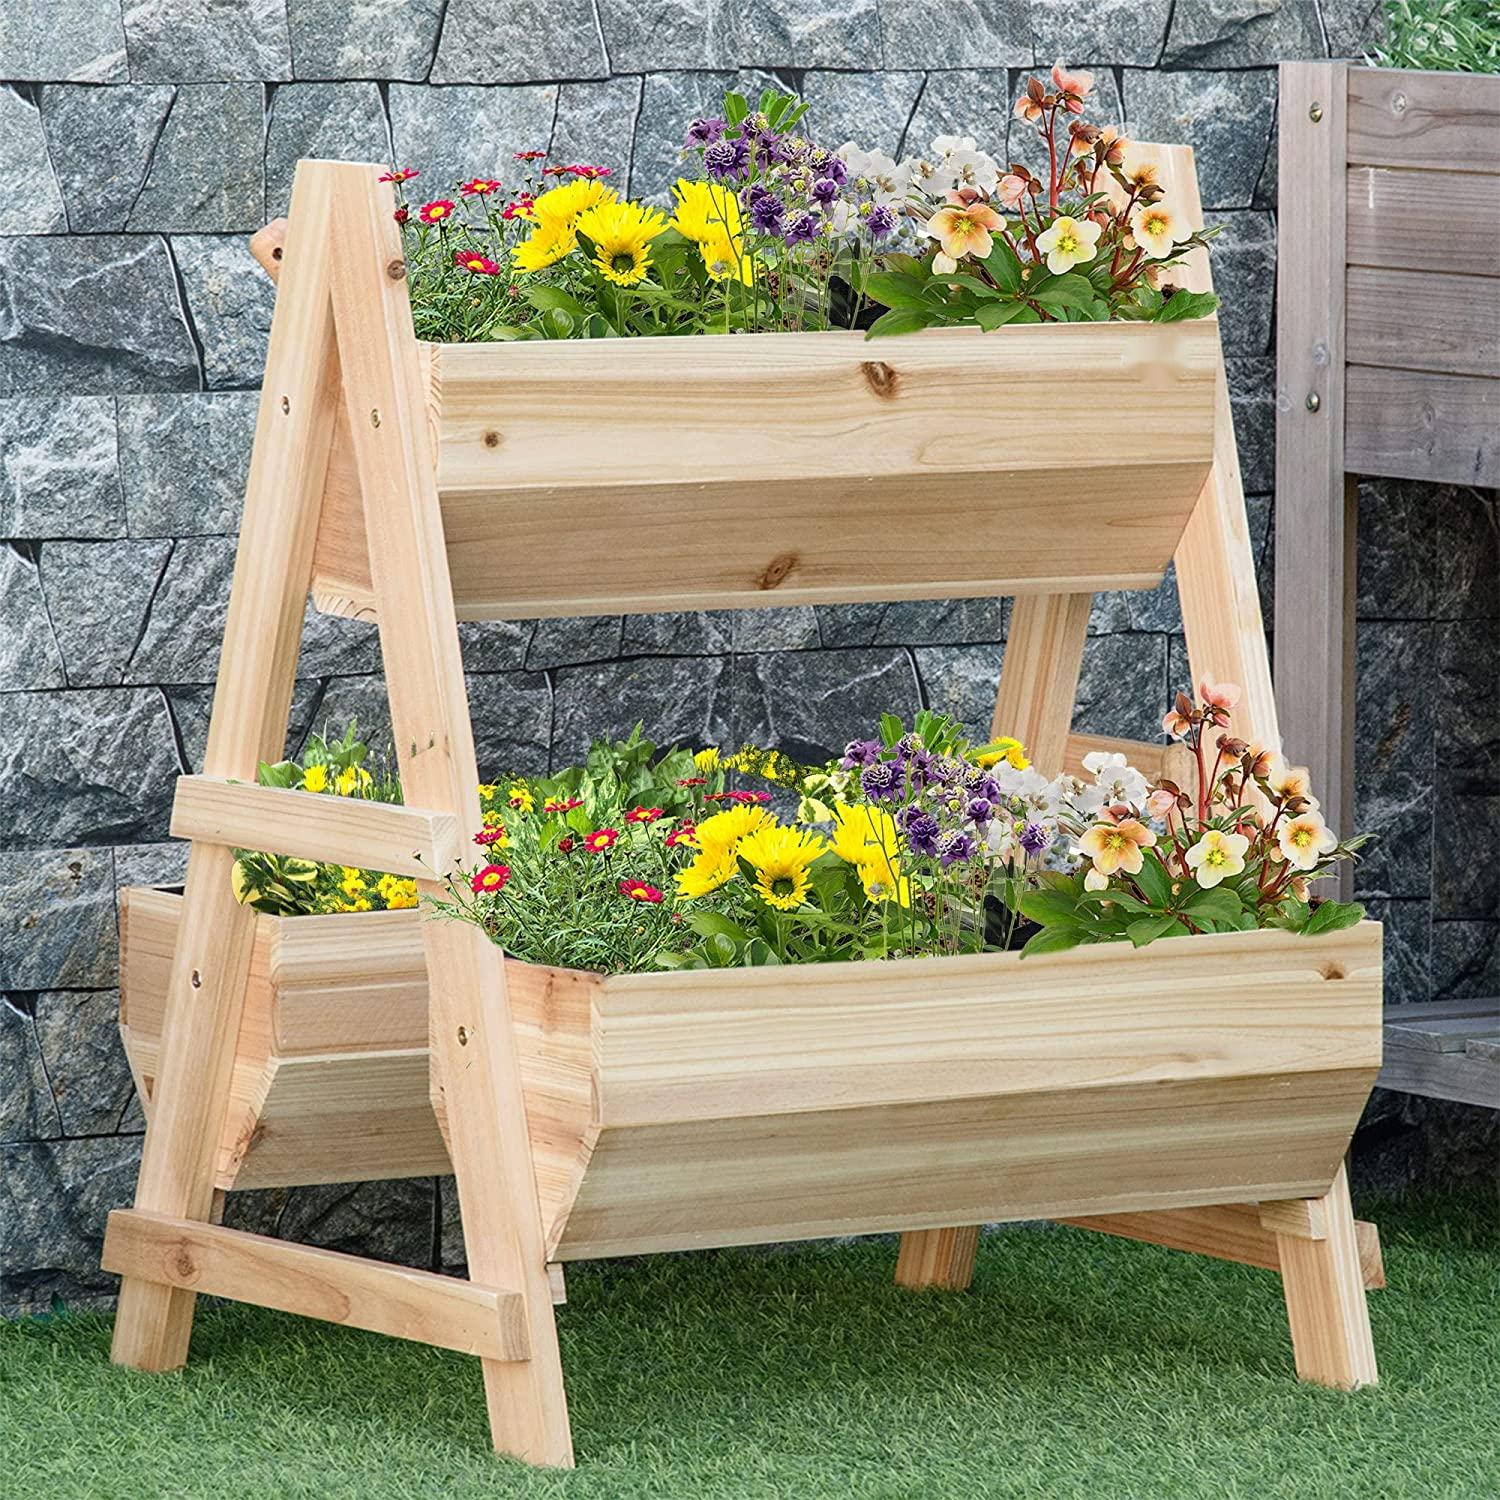 Garden Bed A-shaped Wooden Planter Box with Nonwoven Fabric for Backyard